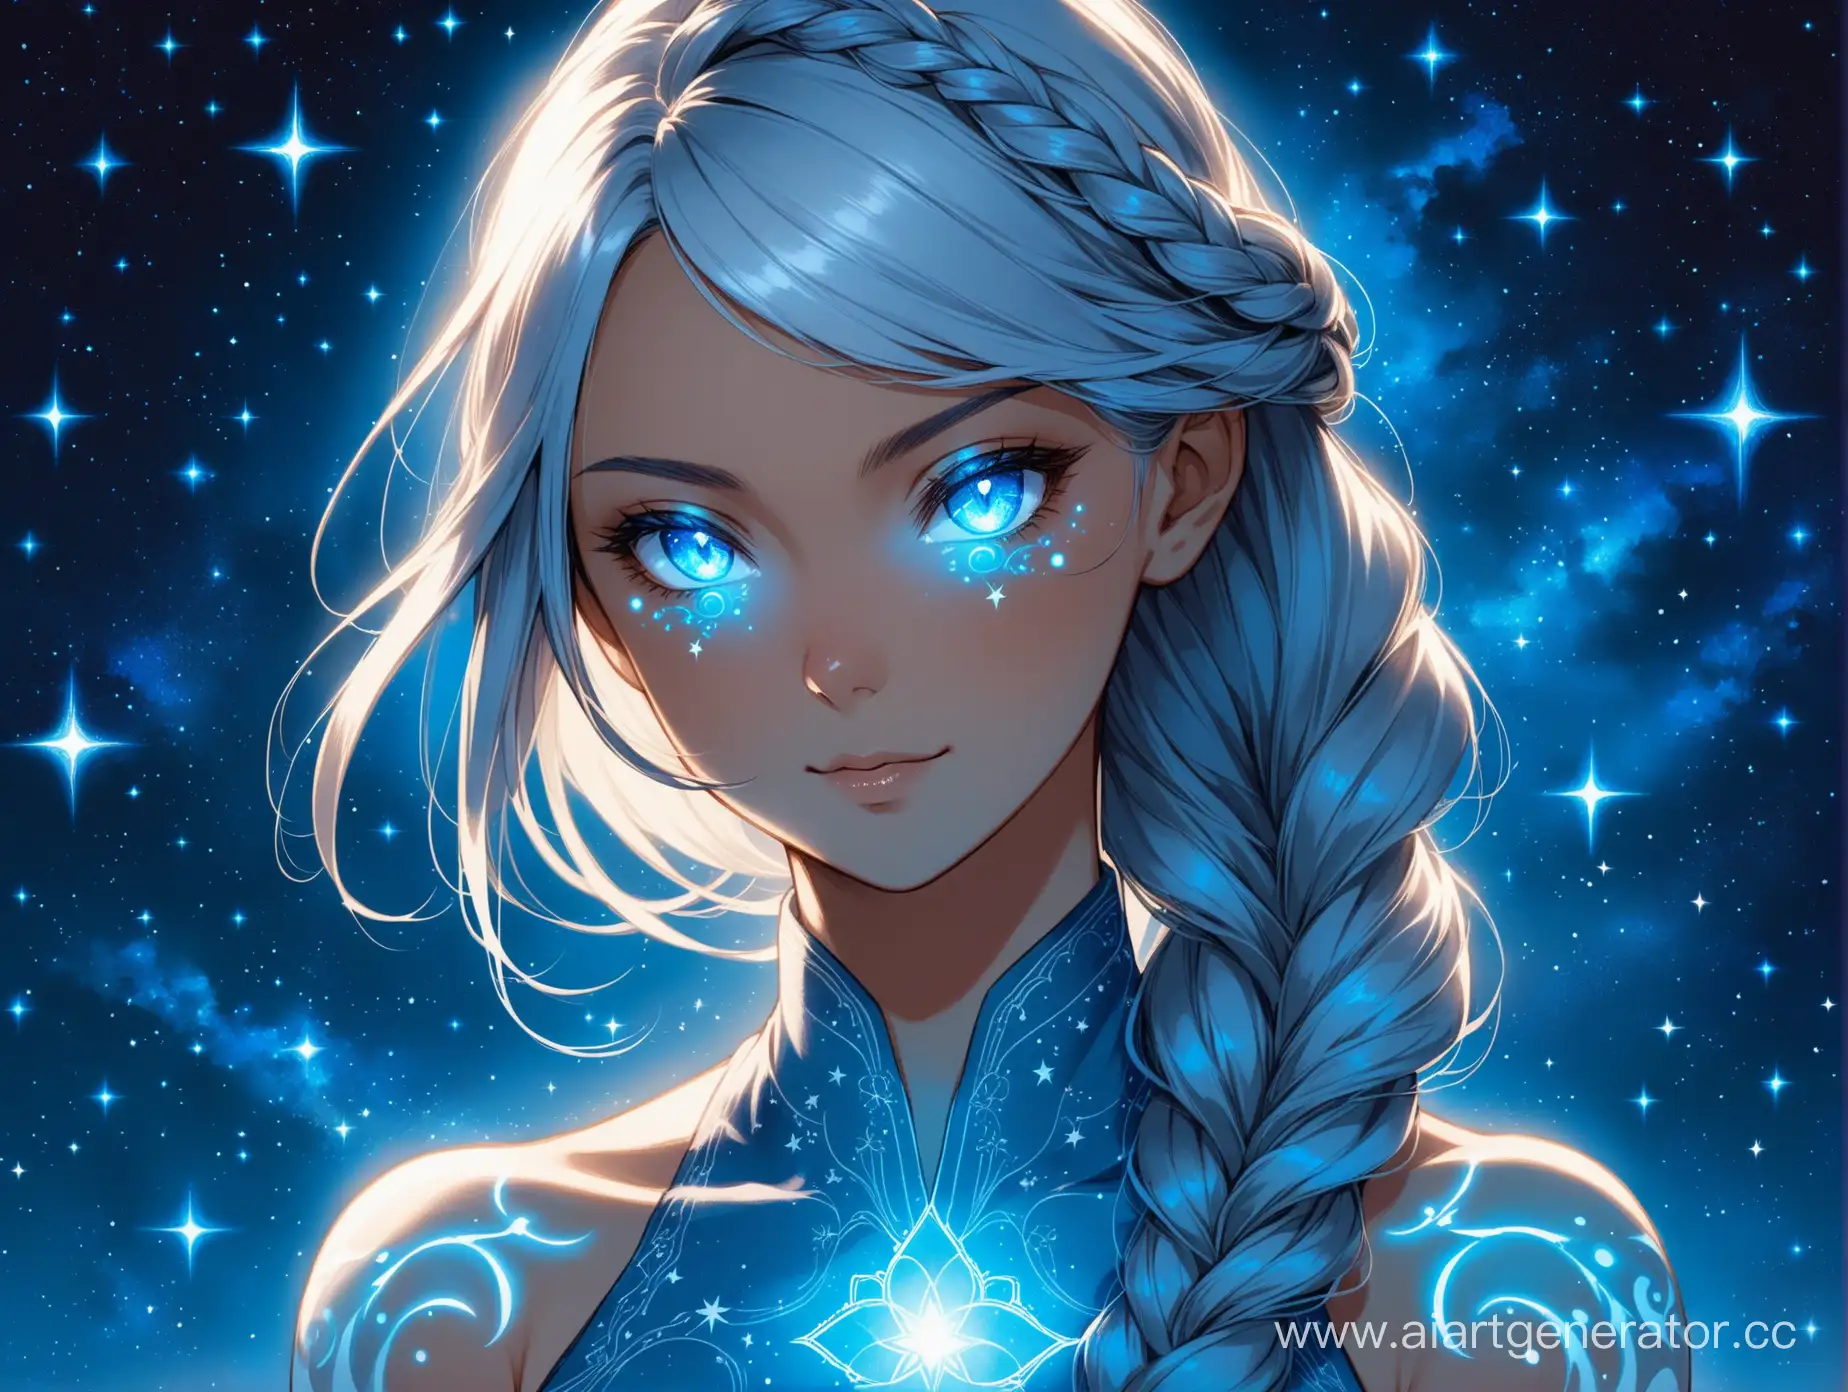 woman with alabaster skin, hair that shifts from white to silver, wearing an intricate braid, and sapphire-blue eyes. She is dressed in soft linen clothing in shades of blue and silver, set against a backdrop of a starry night sky. Her facial expression is confident and enigmatic, with a notable feature of glowing tattoos on her skin, emitting power and magic, (glowing hair:1.3), (profile picture)